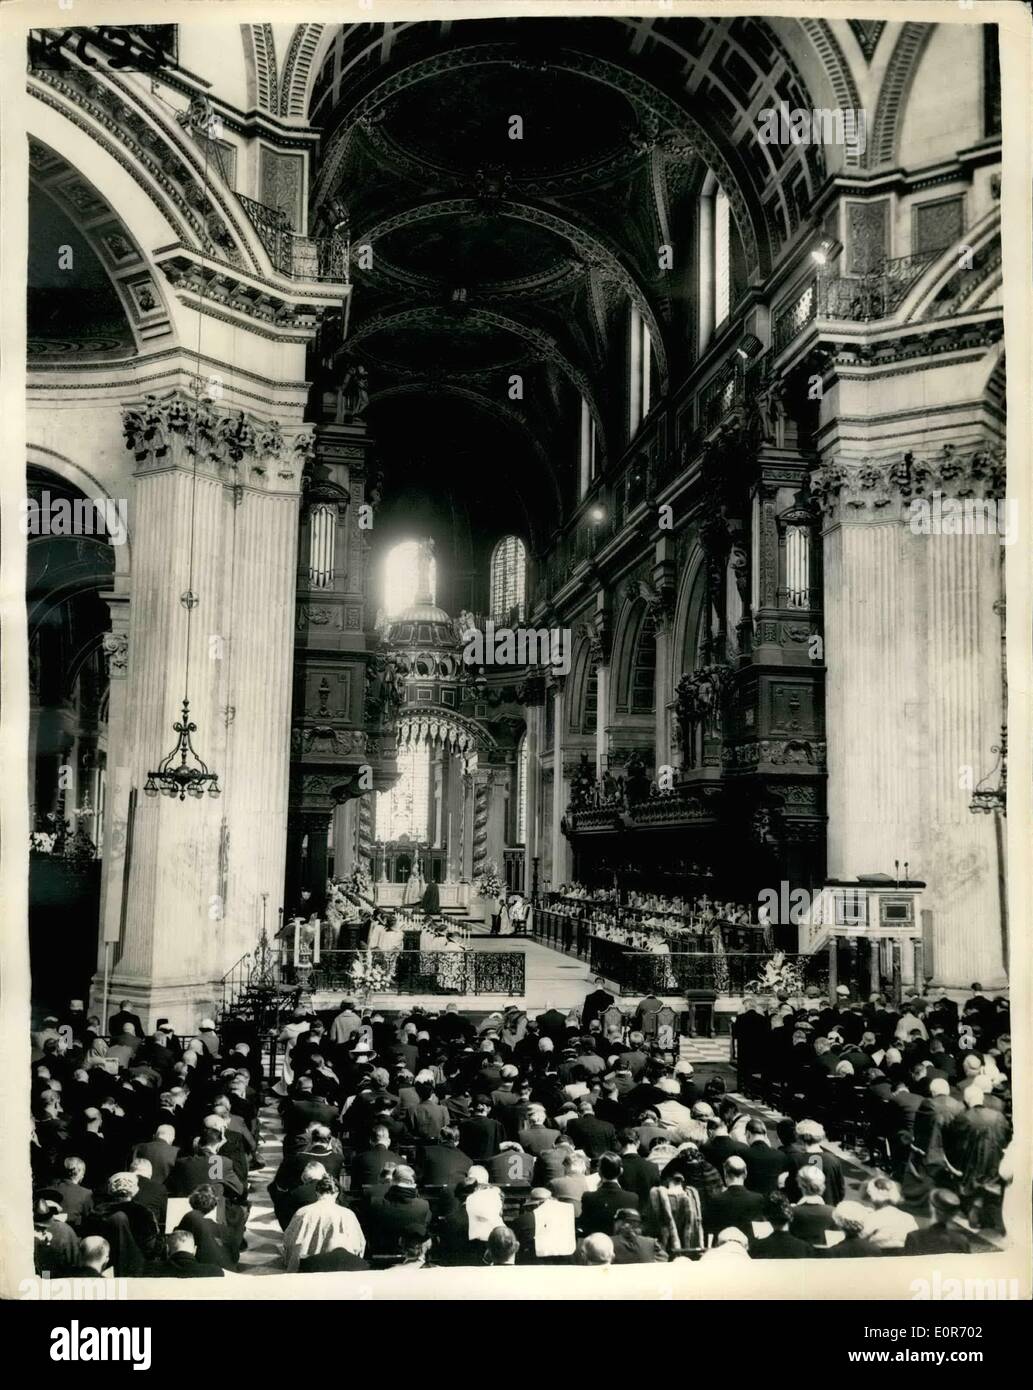 May 05, 1958 - Queen attends dedication at St. Paul's . H.M. the Queen and the Duke of Edinburgh today attended a service for the re-dedication of the restored eastern part of St. Paul's Cathedral and the dedication of the new high Altar as a memorial to the 335, 451 men and women of the commonwealth overseas who died in the two worldwars. Photo shows the Archbishop of Canterbury during the Consecration showing the Queen and the Duke of Edinburgh seated at St. Paul's cathedral today. Stock Photo